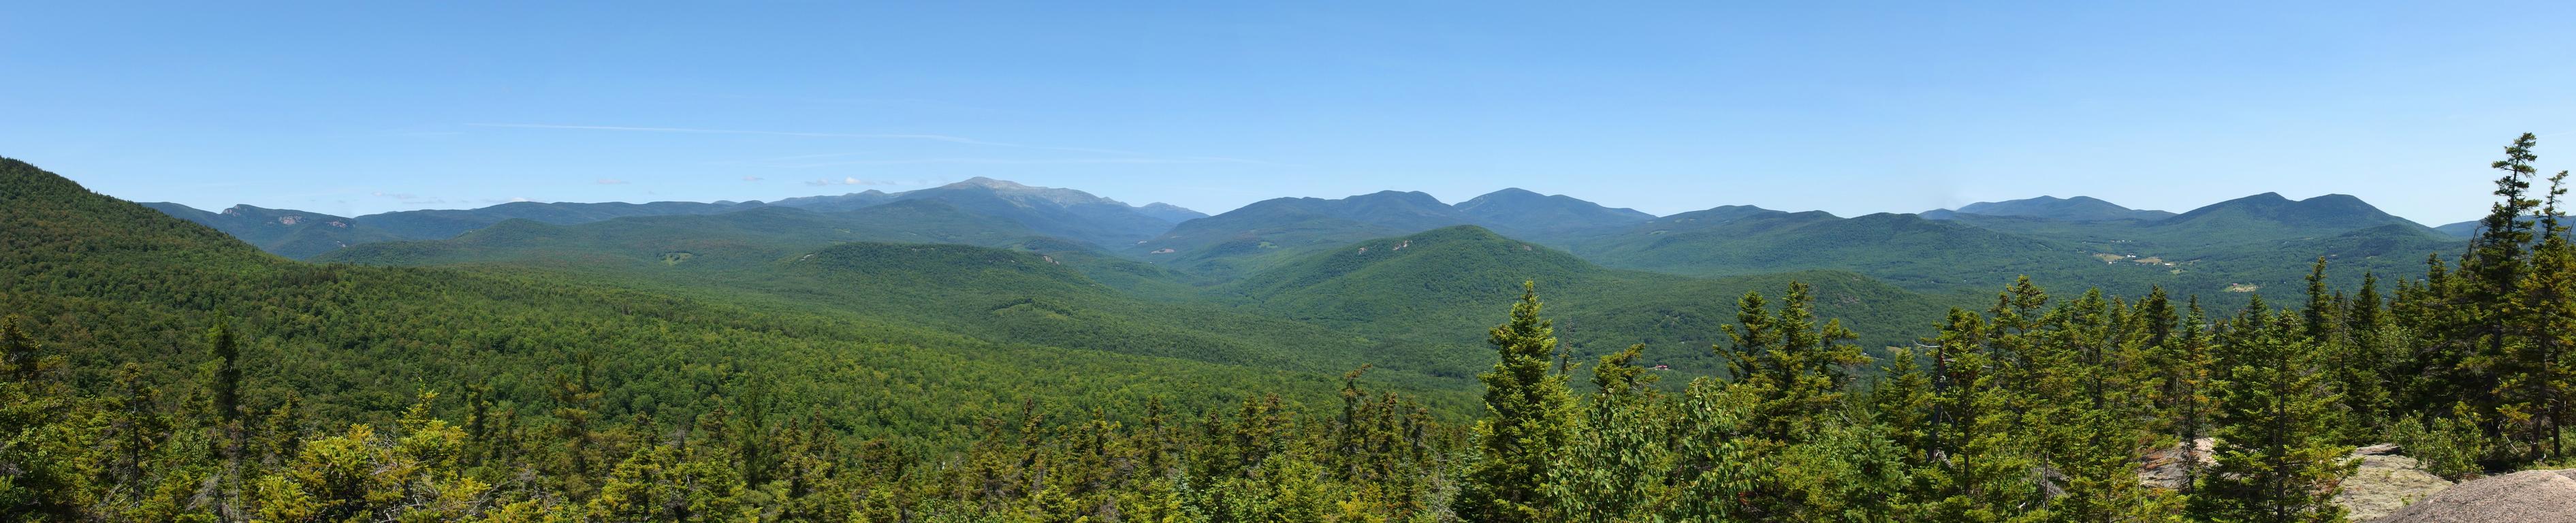 180-degree view from Green Hill in the White Mountains of New Hampshire